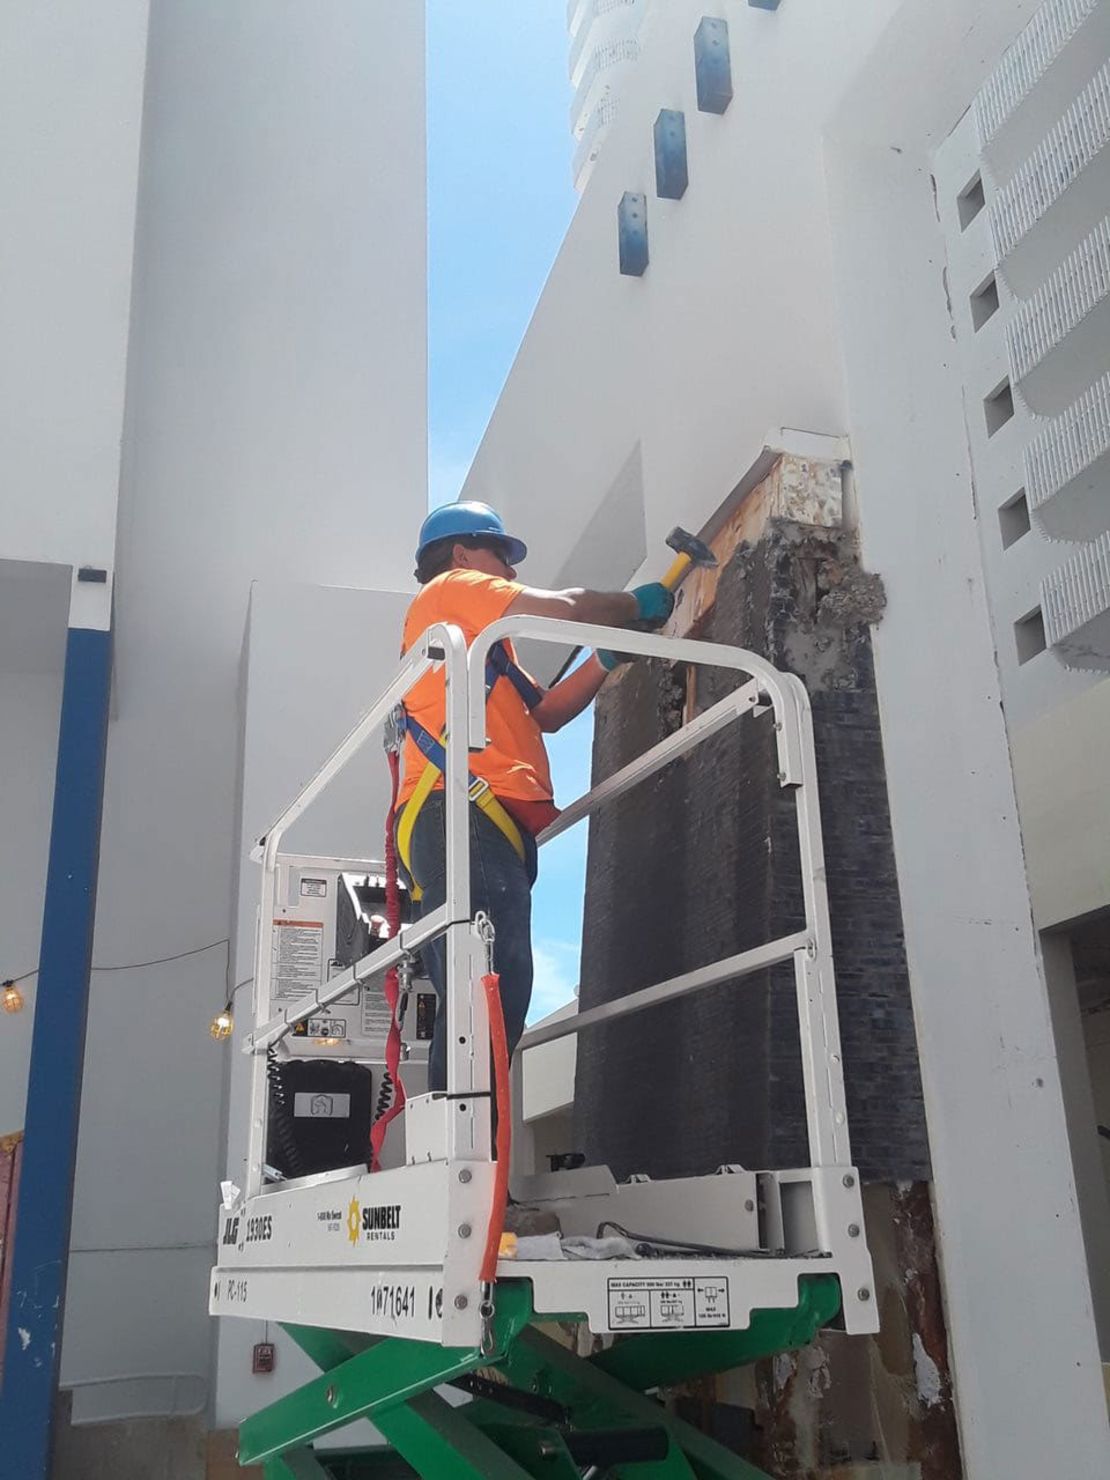 Reinaldo Quintero rebuilding a residential condo building in early 2019 after Hurricane Michael hit Panama City in October 2018.